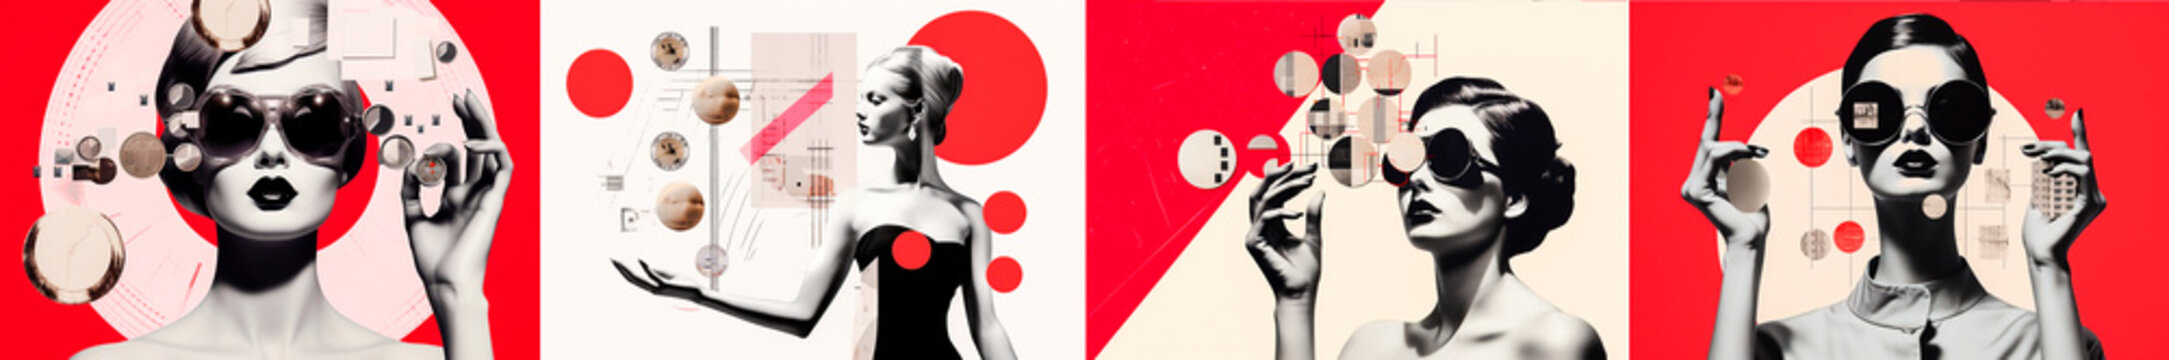 A unique combination of retro and futuristic aesthetics. The cut collage creates a visually striking design The white background adds a clean, modern feel Travel back to the nostalgic era of the 1950s